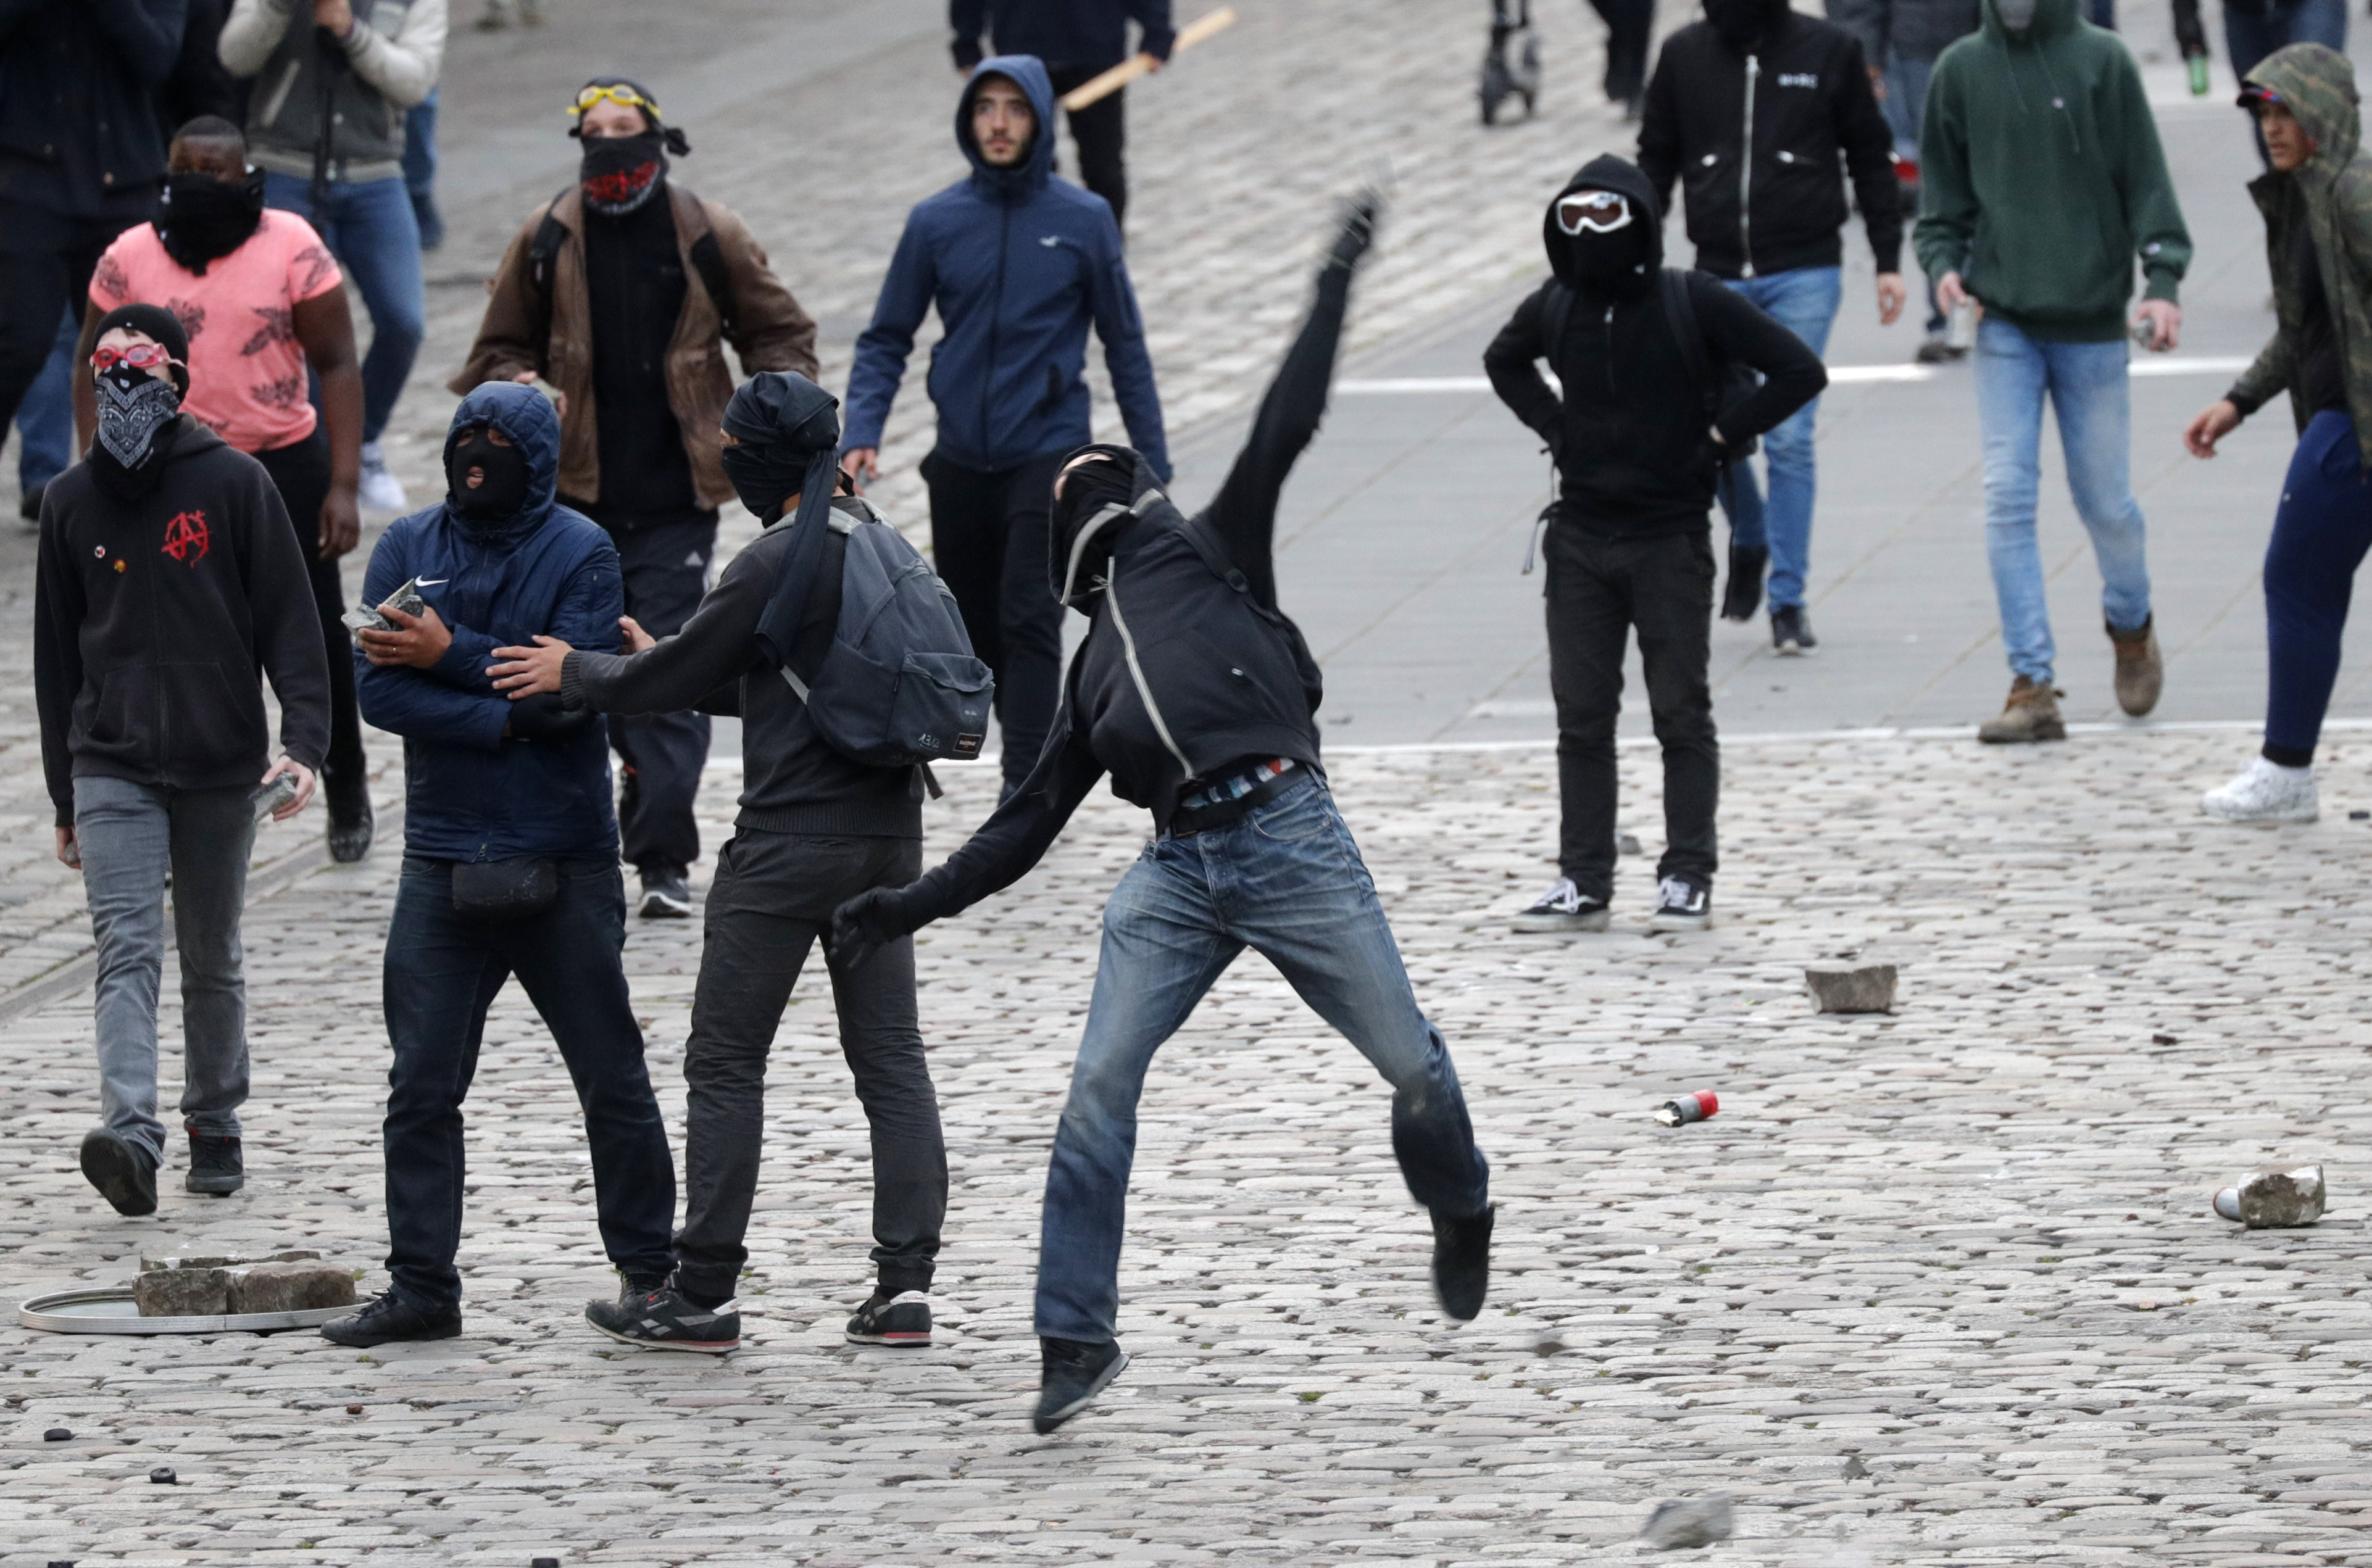 PARIS 2017-04-17 Masked demonstrators throw stones as they protest outside the venue of a campaign rally for Marine Le Pen, French National Front (FN) political party leader and candidate for French 2017 presidential election in Paris, France, April 17, 2017. REUTERS/Philippe Wojazer TPX IMAGES OF THE DAY Photo: / REUTERS / TT / kod 72000